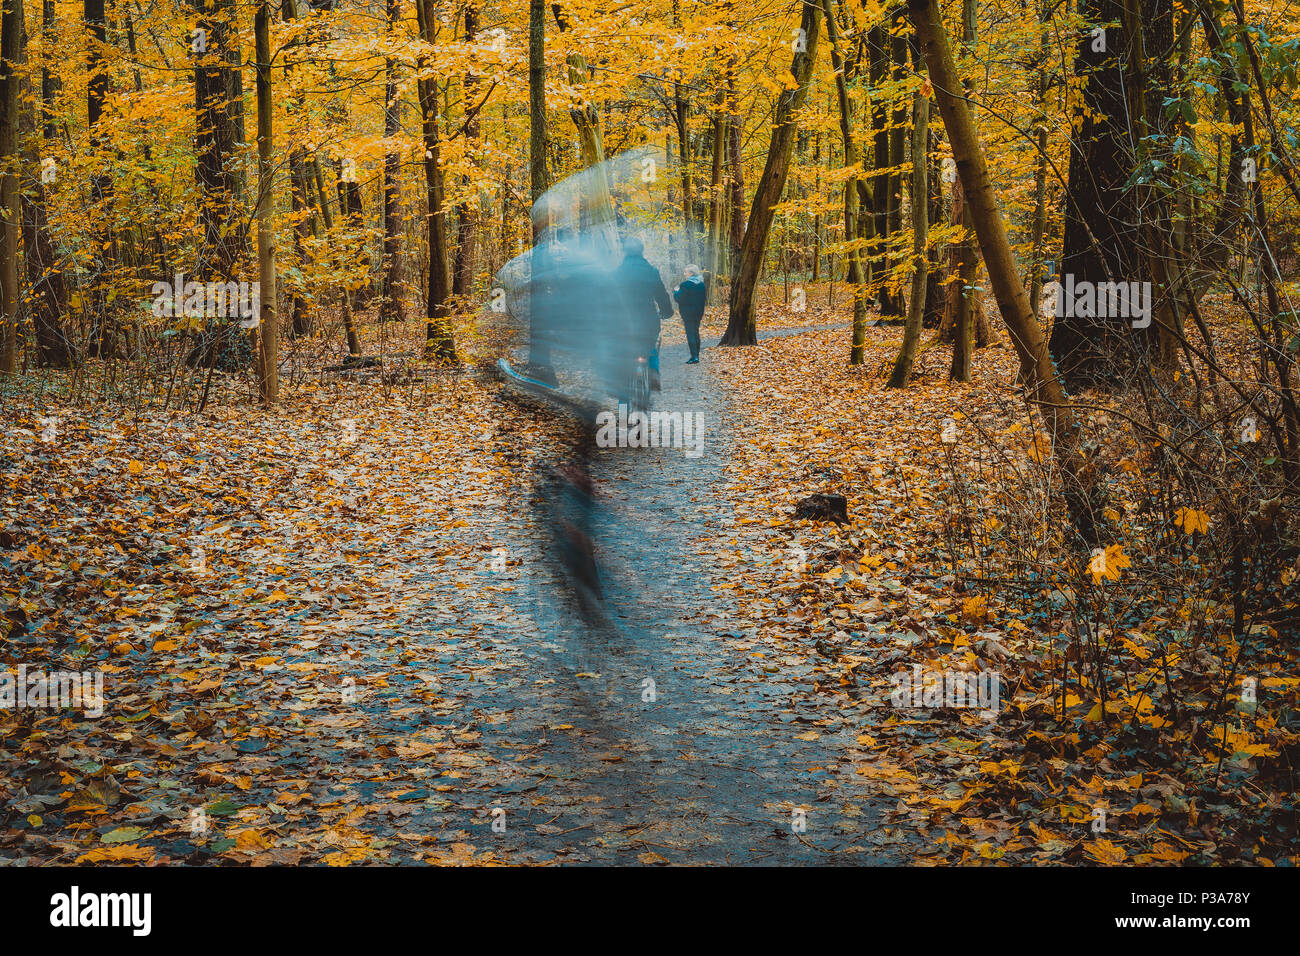 Ghostly figures in autumnal square, autumn forest landscape, trees with yellow leaves and alleys Stock Photo